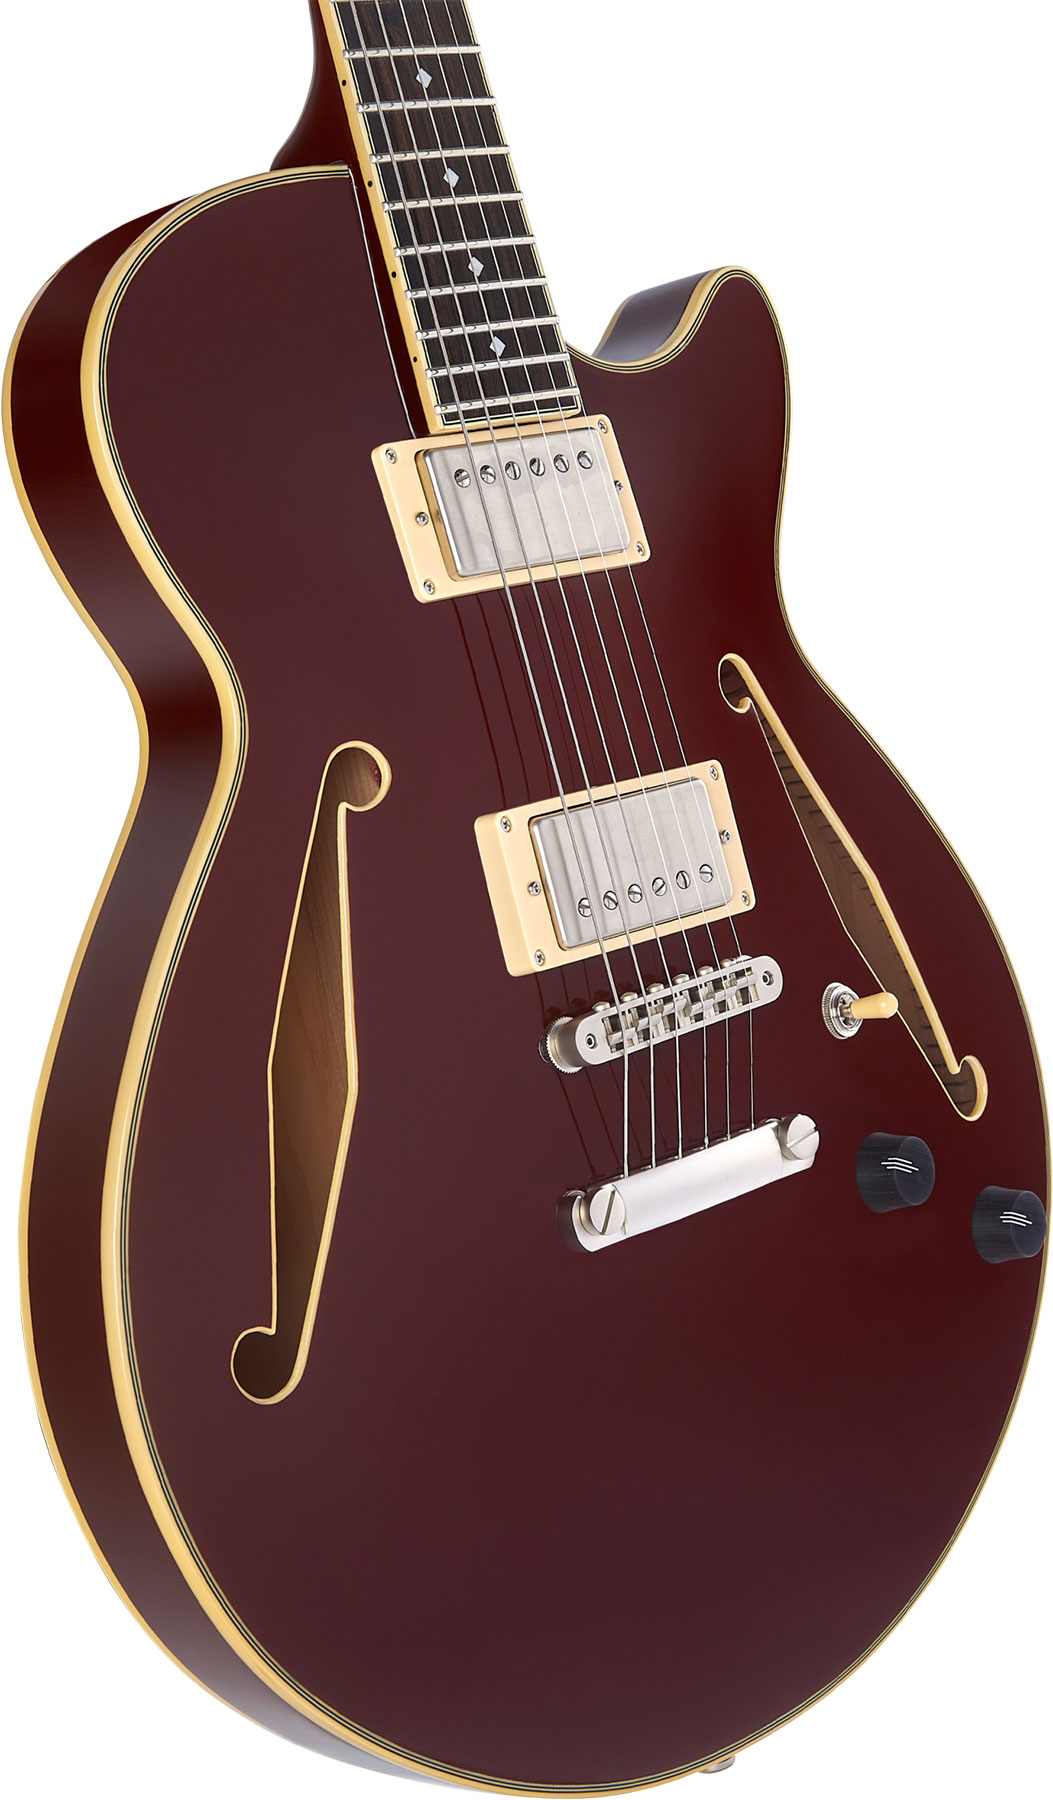 D'angelico Ss Tour Excel 2h Ht Eb - Solid Wine - Semi-Hollow E-Gitarre - Variation 3